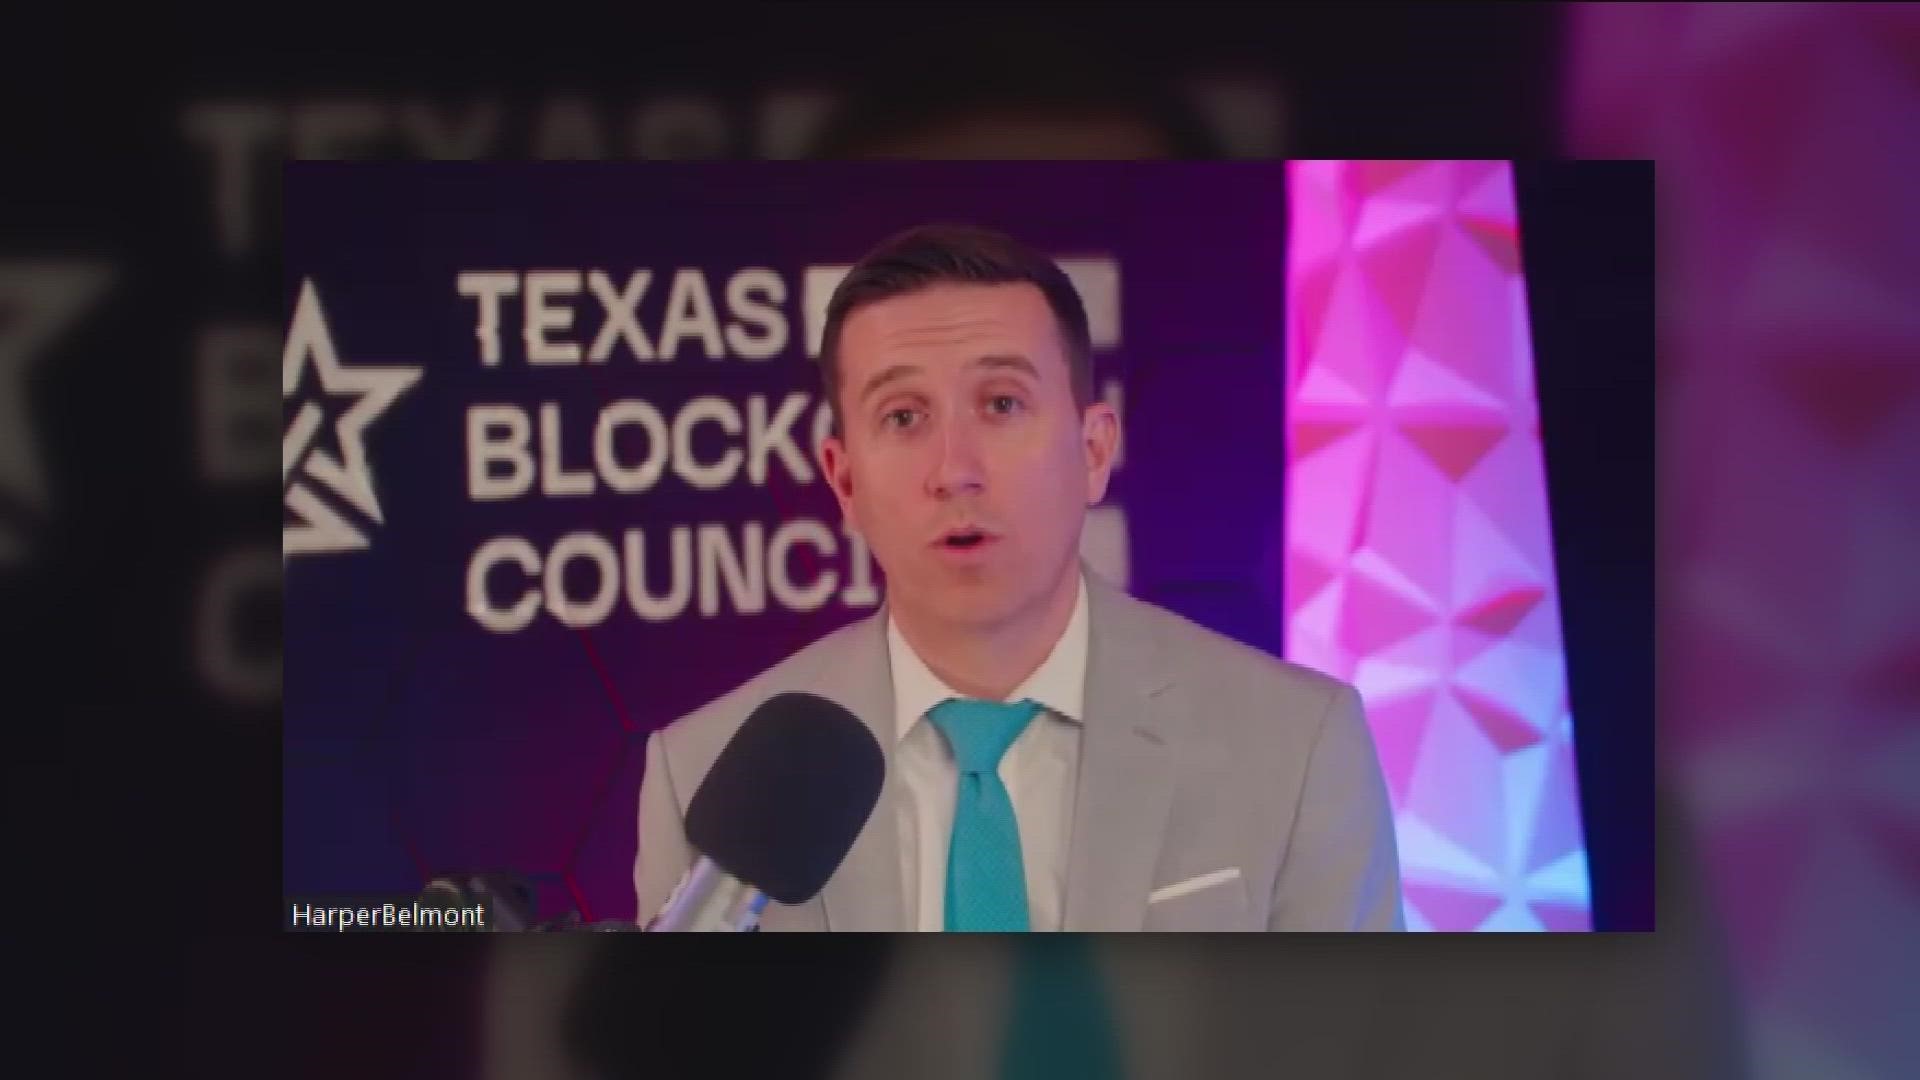 The cryptocurrency industry is known for being unregulated. But after billions of dollars were lost, a new Texas bill has been filed to help protect investors.